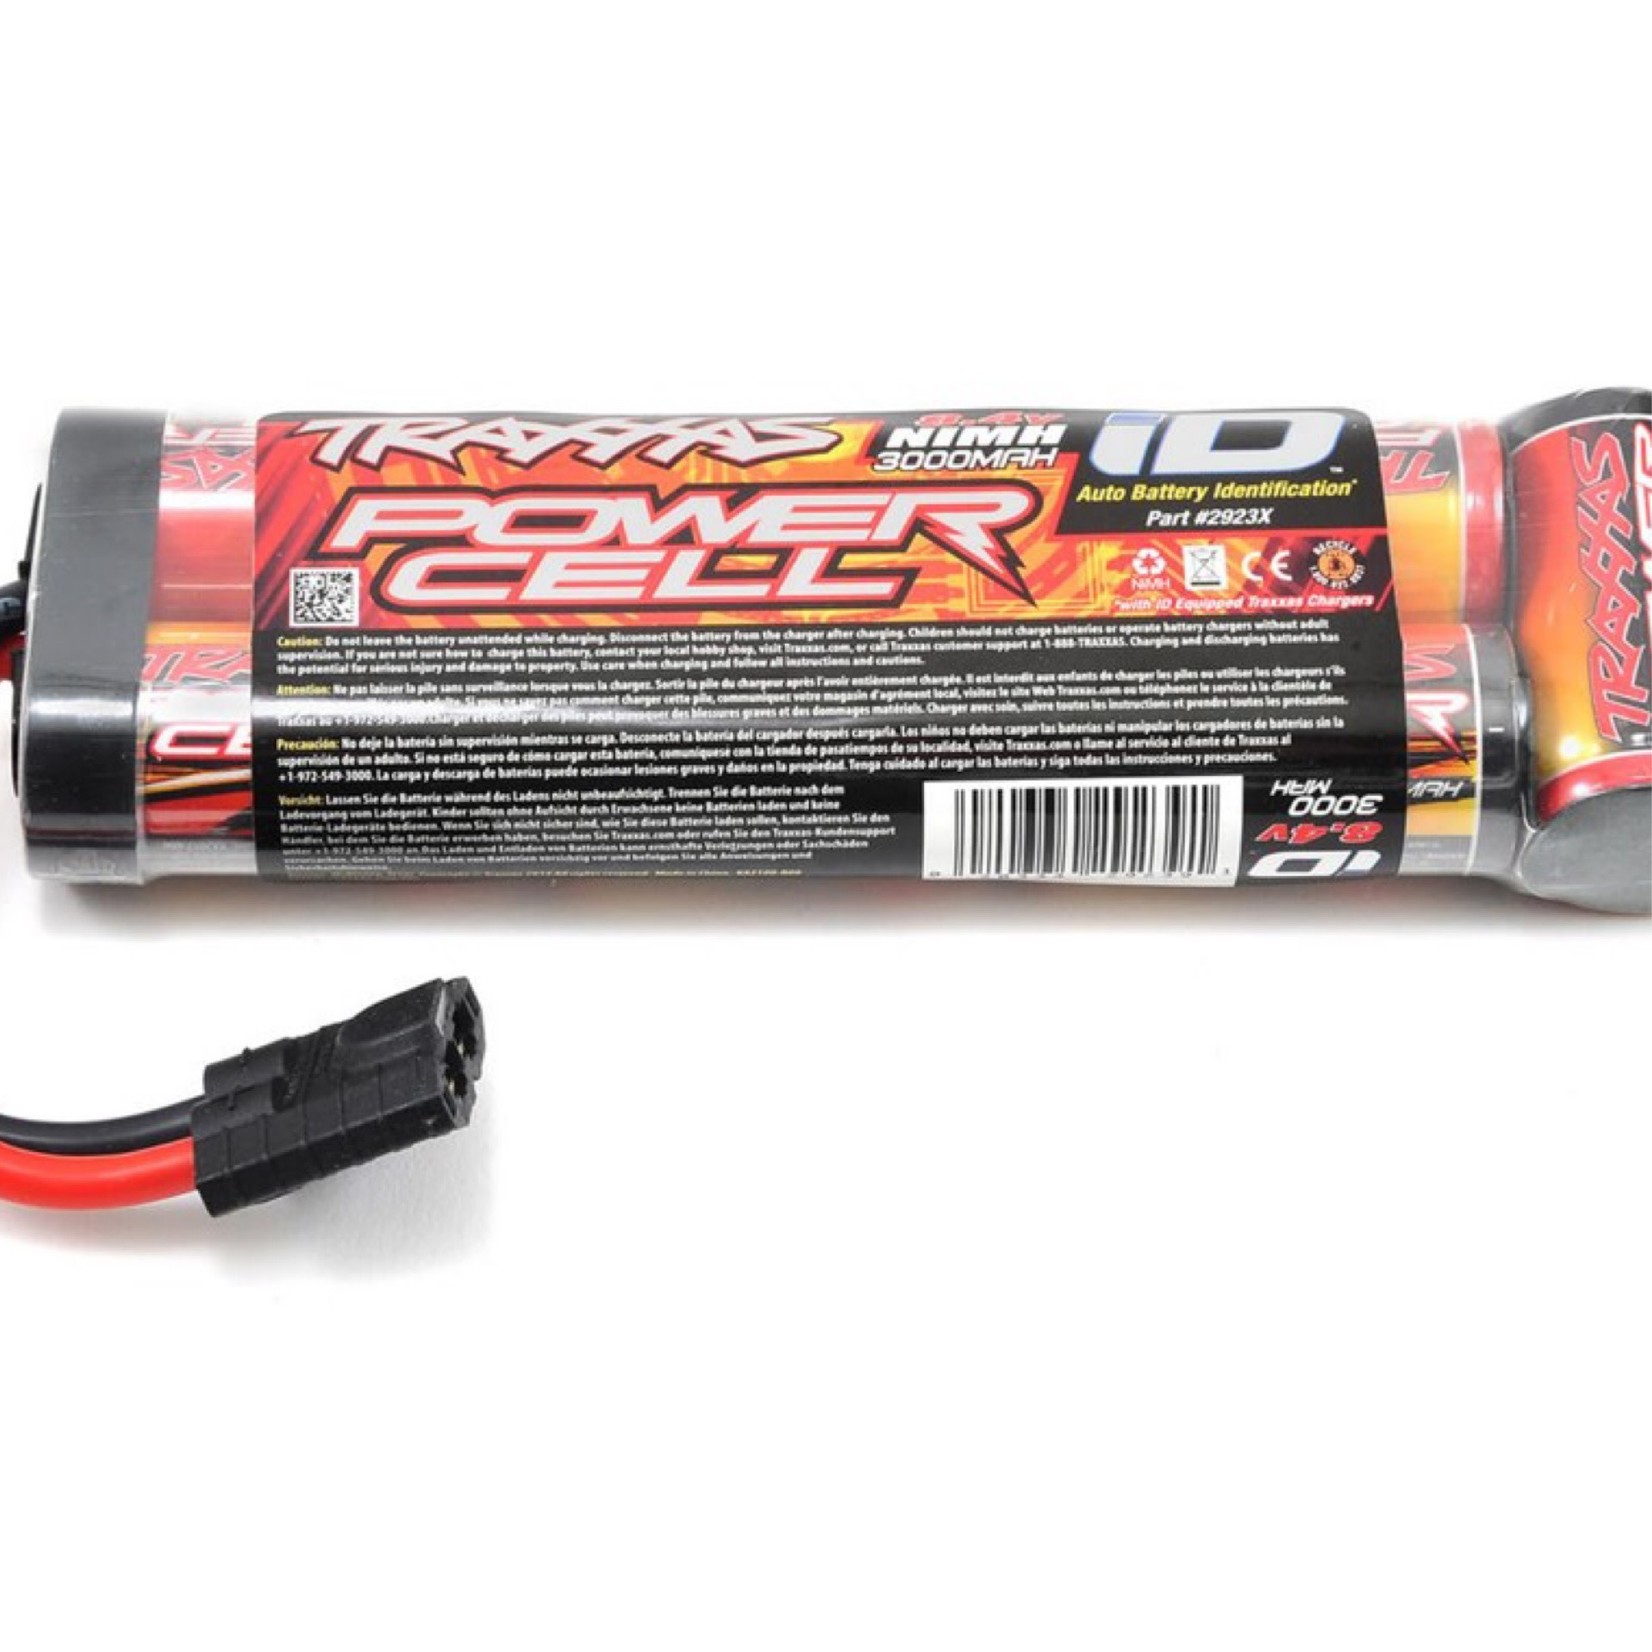 Traxxas Traxxas Power Cell 7-Cell Stick NiMH Battery Pack w/iD Connector (8.4V/3000mAh) 2923X